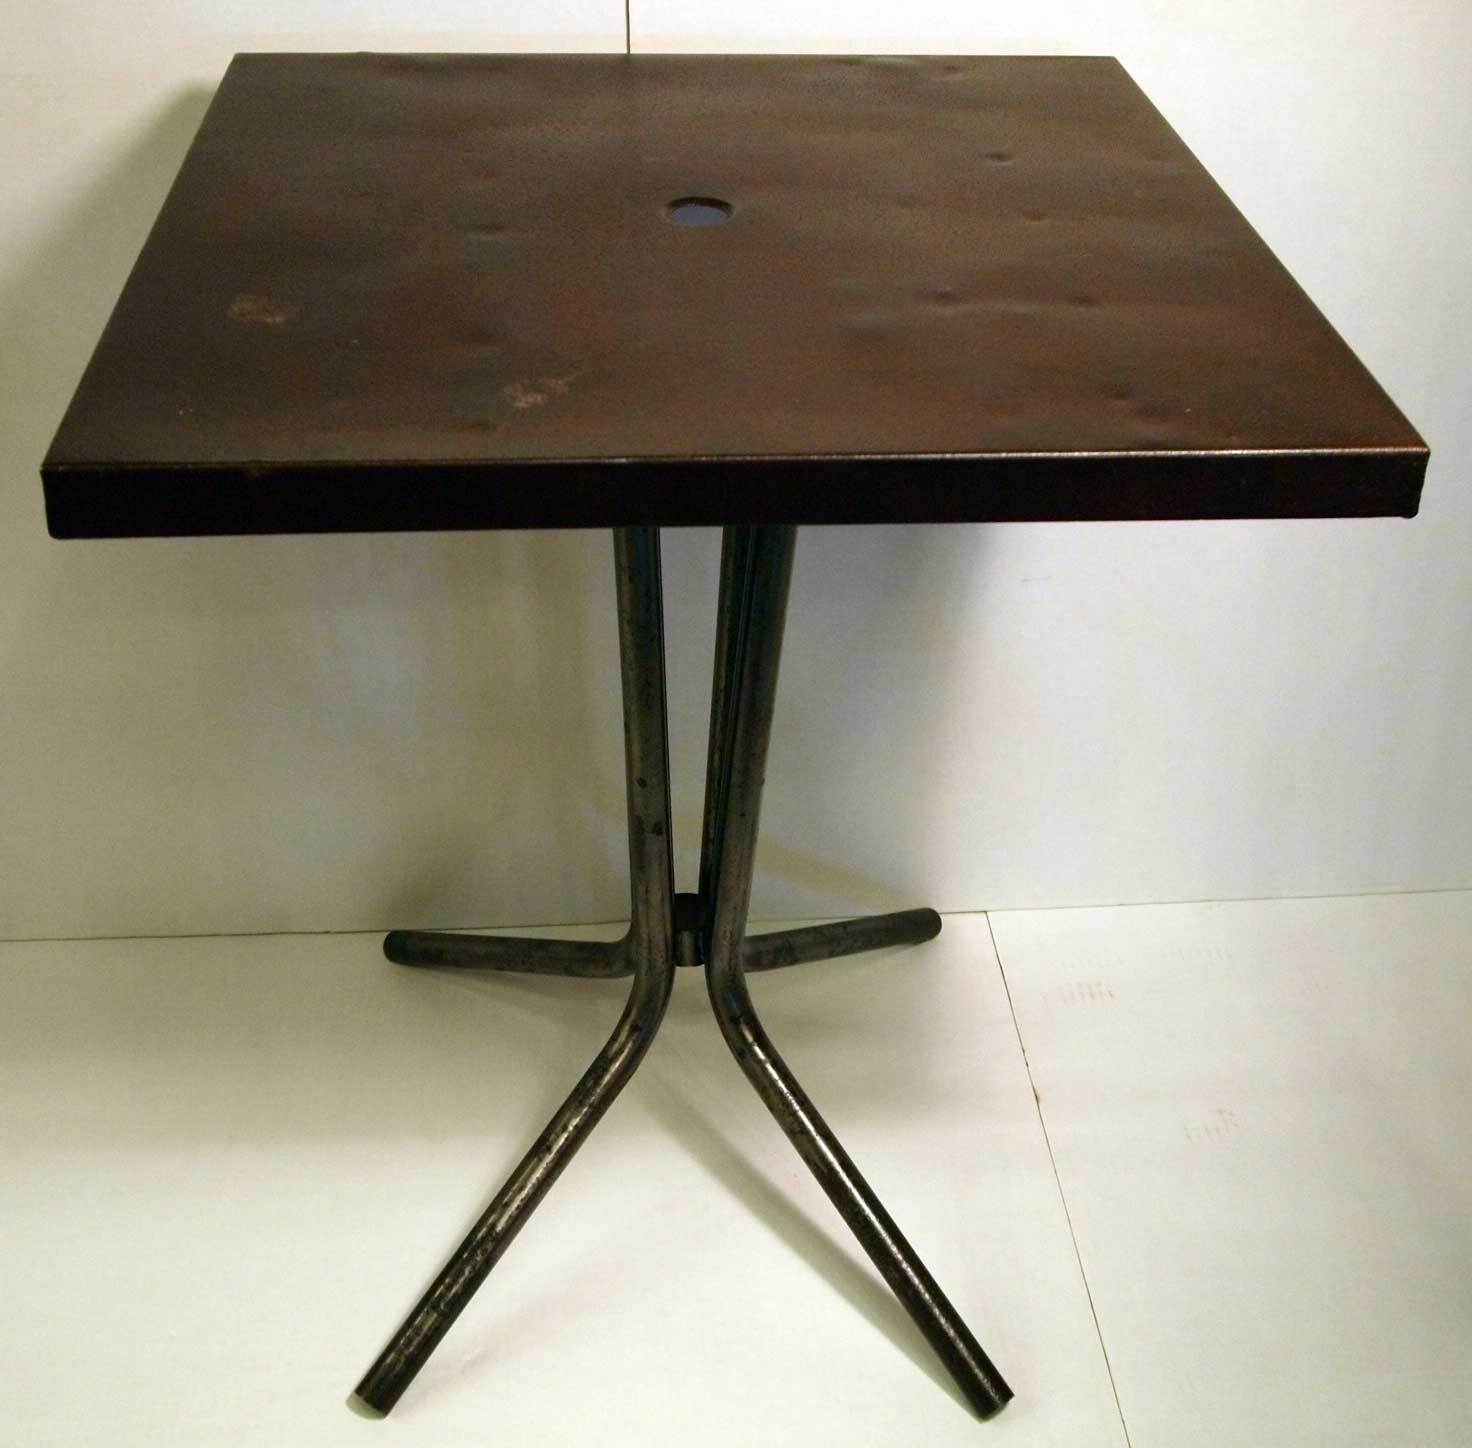 French Square Top Metal Bistro Table